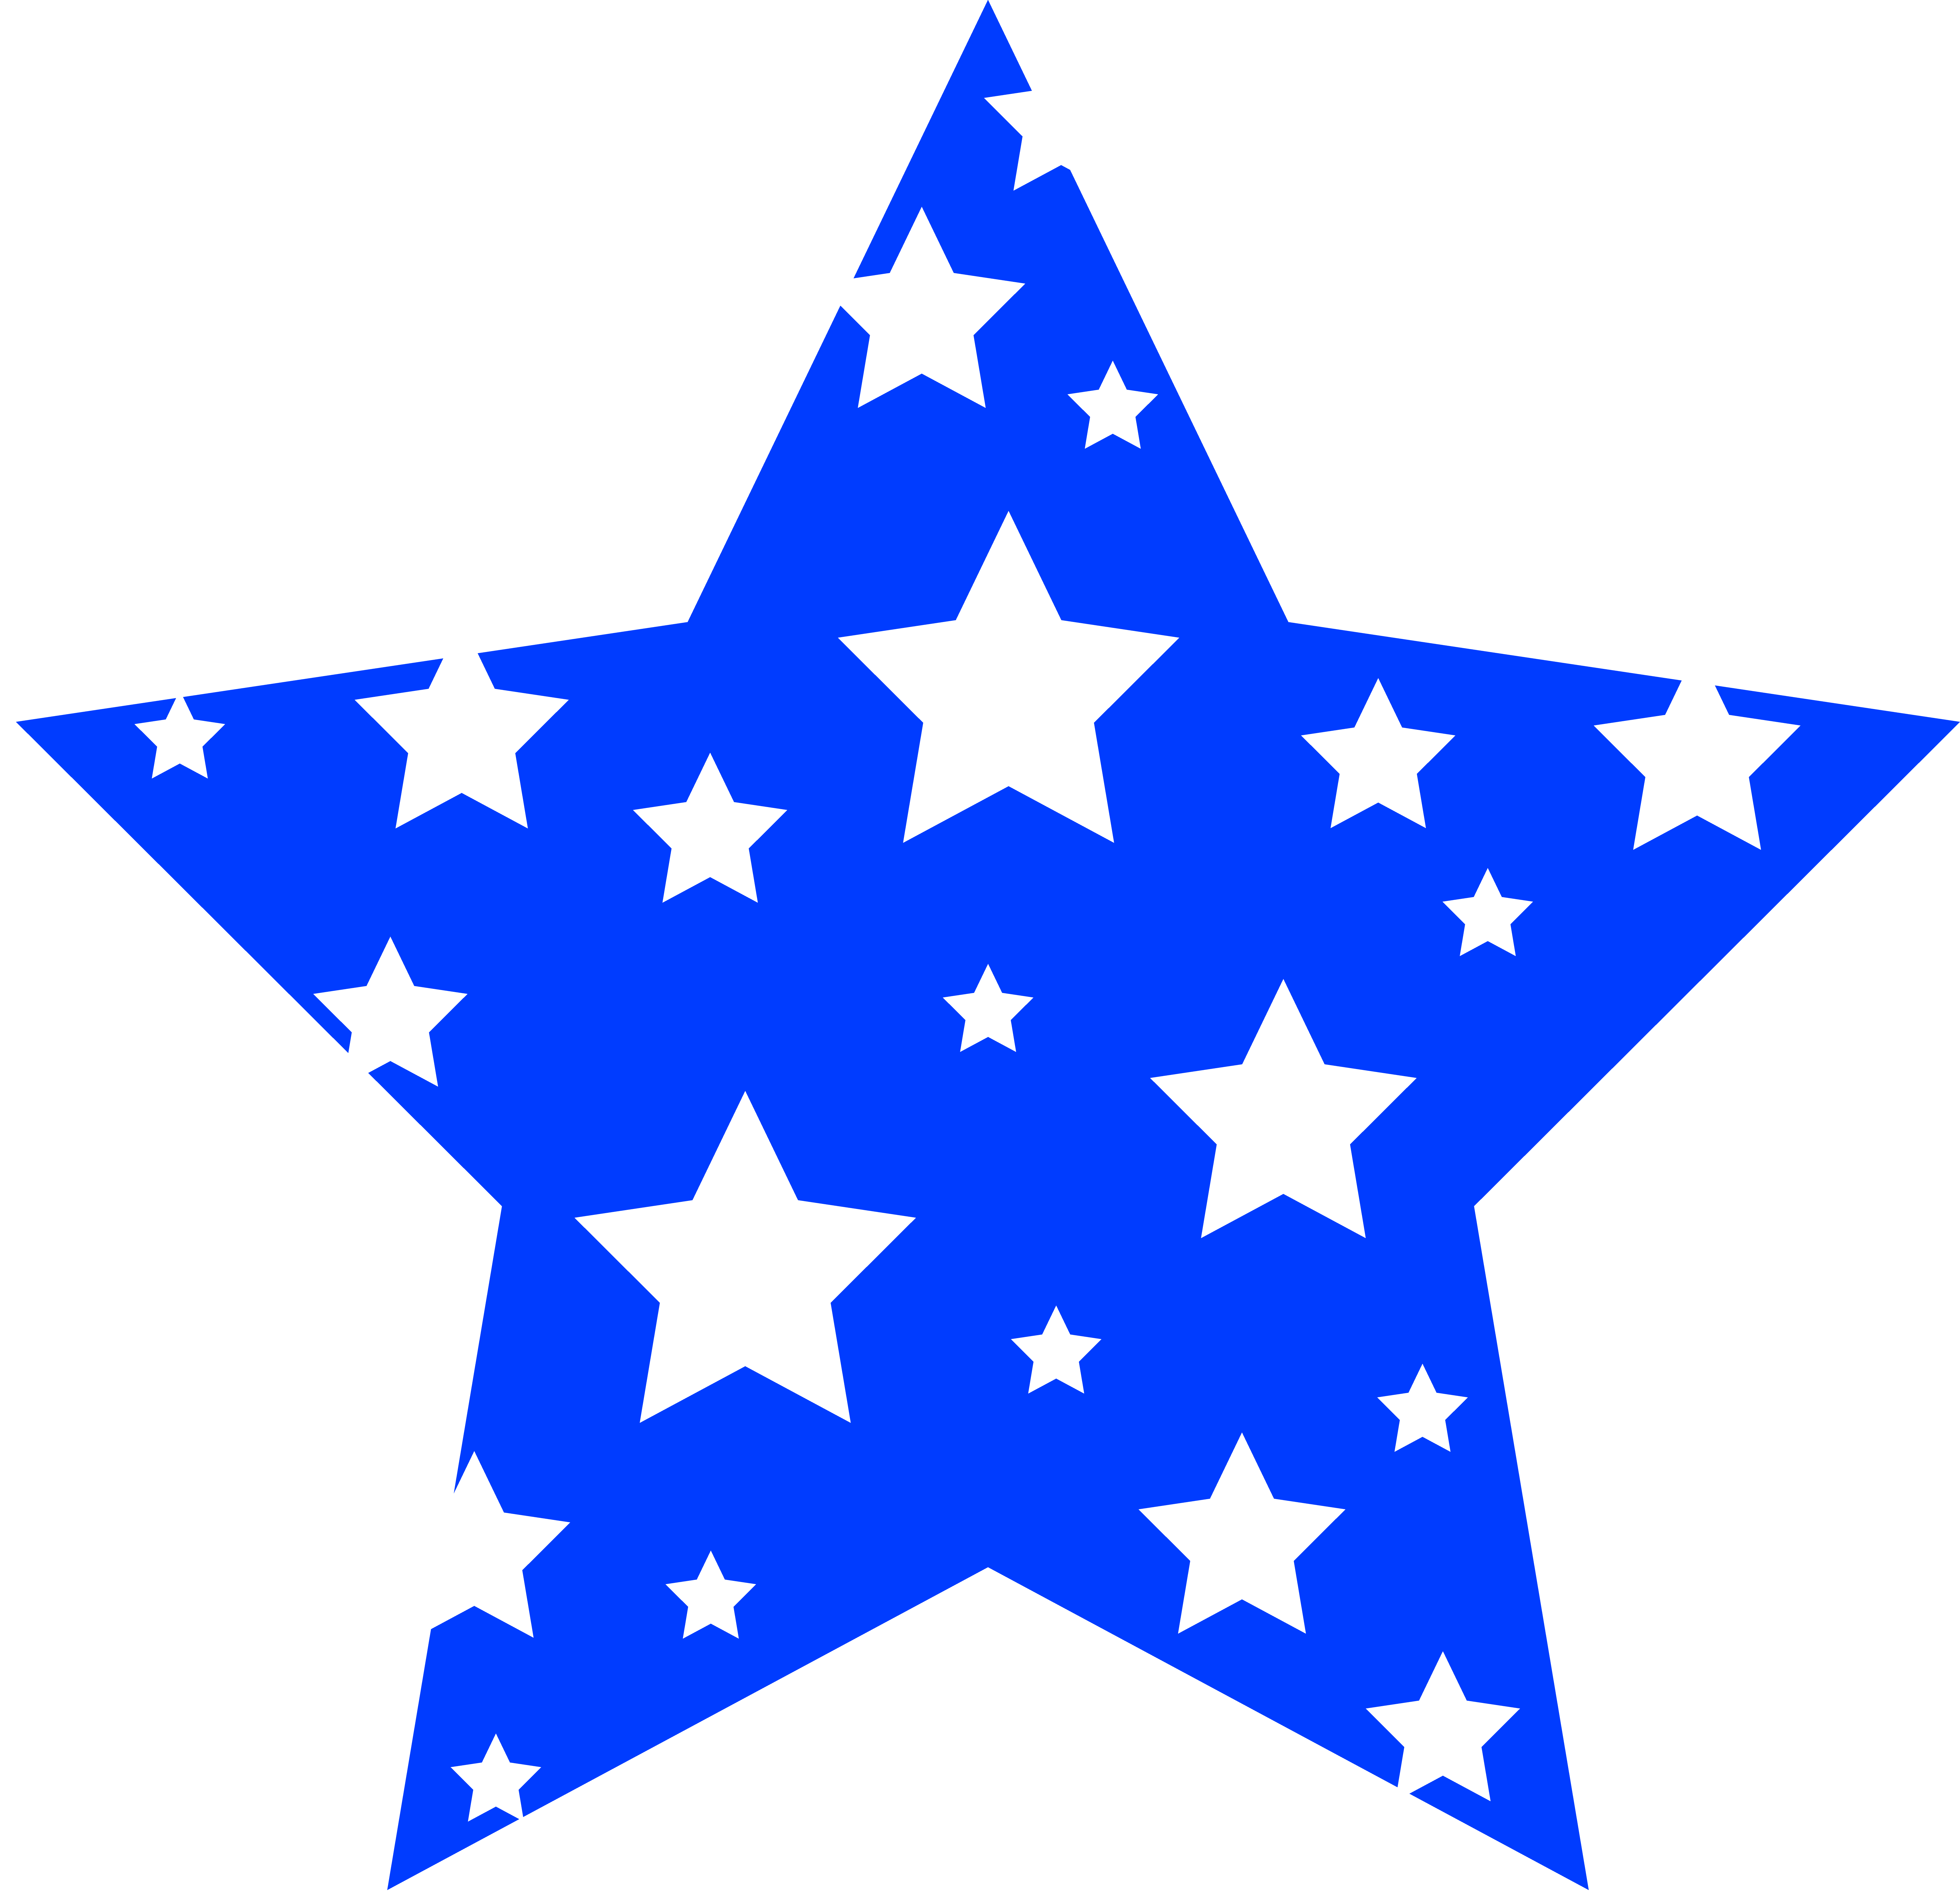 Blue Star Patterned With White | Clipart Panda - Free Clipart Images